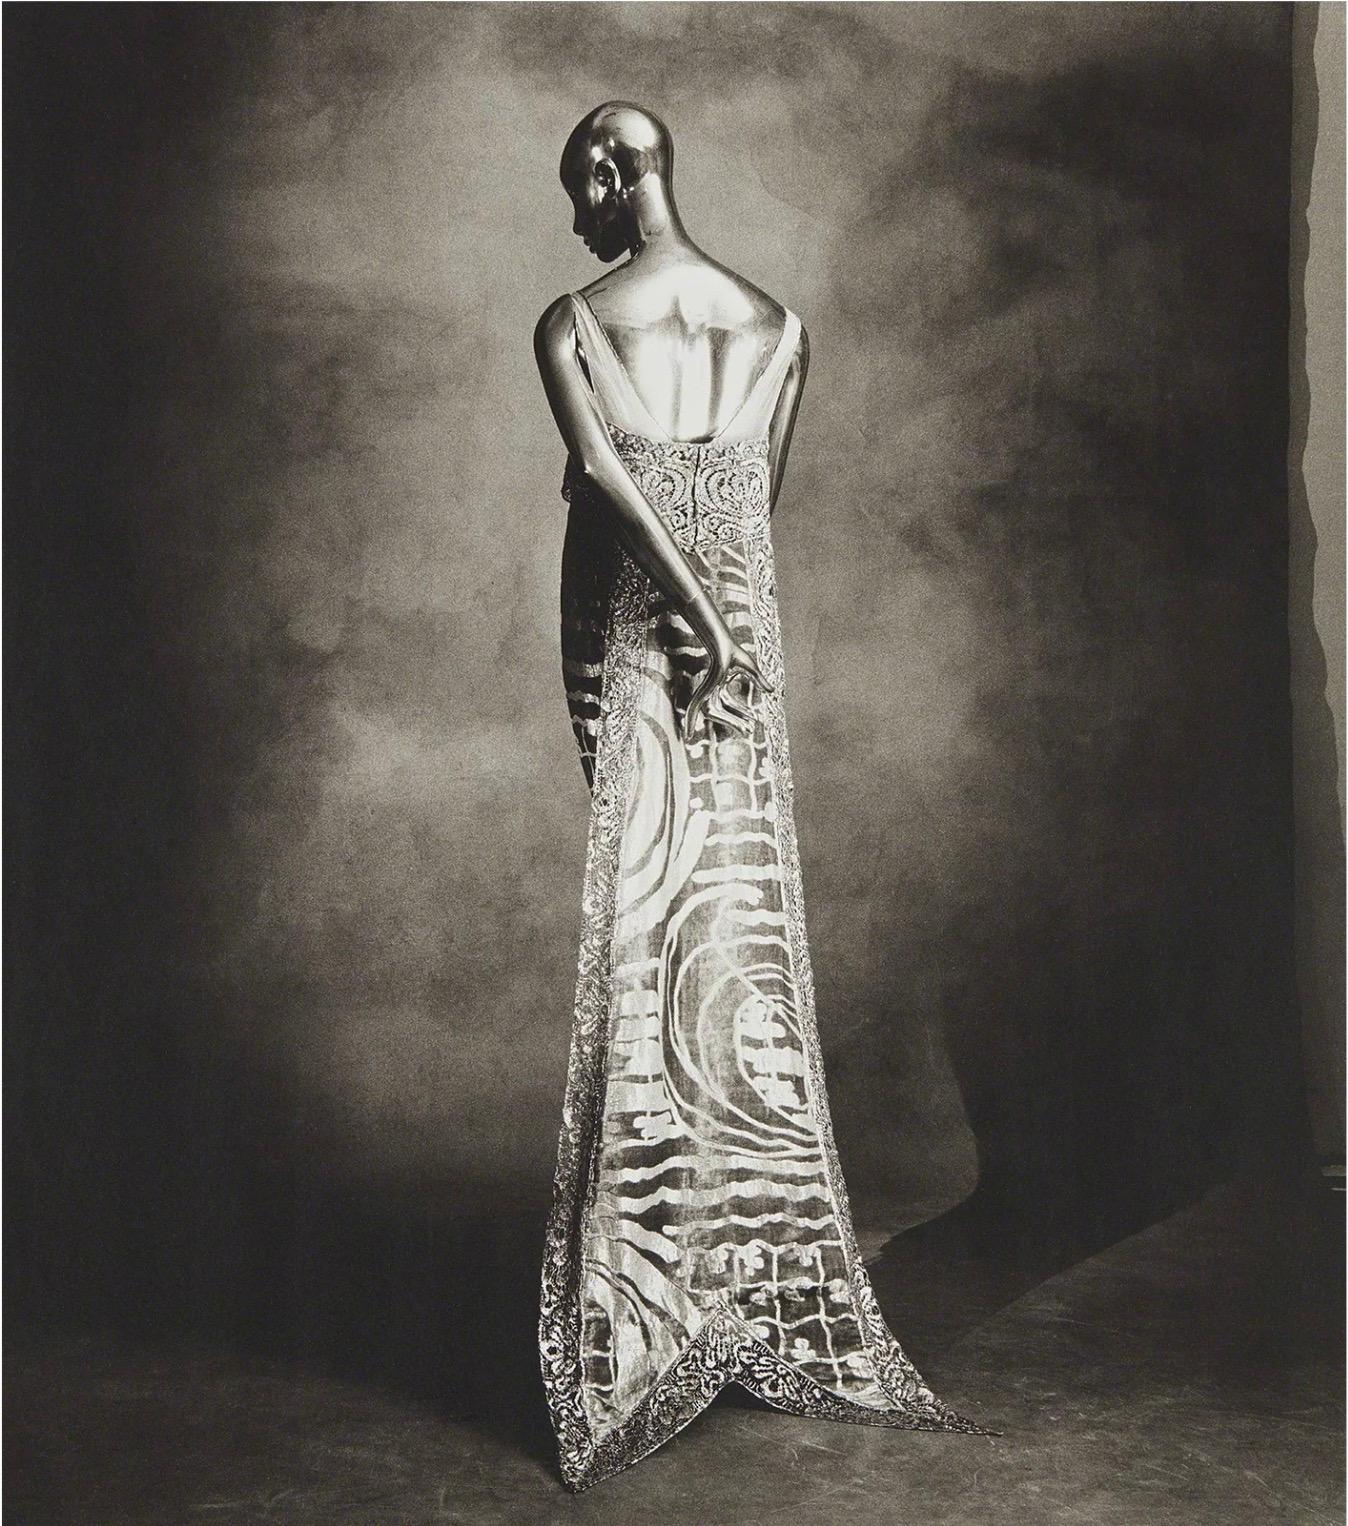 Callot Swallow-Tail Dress - Photograph by Irving Penn